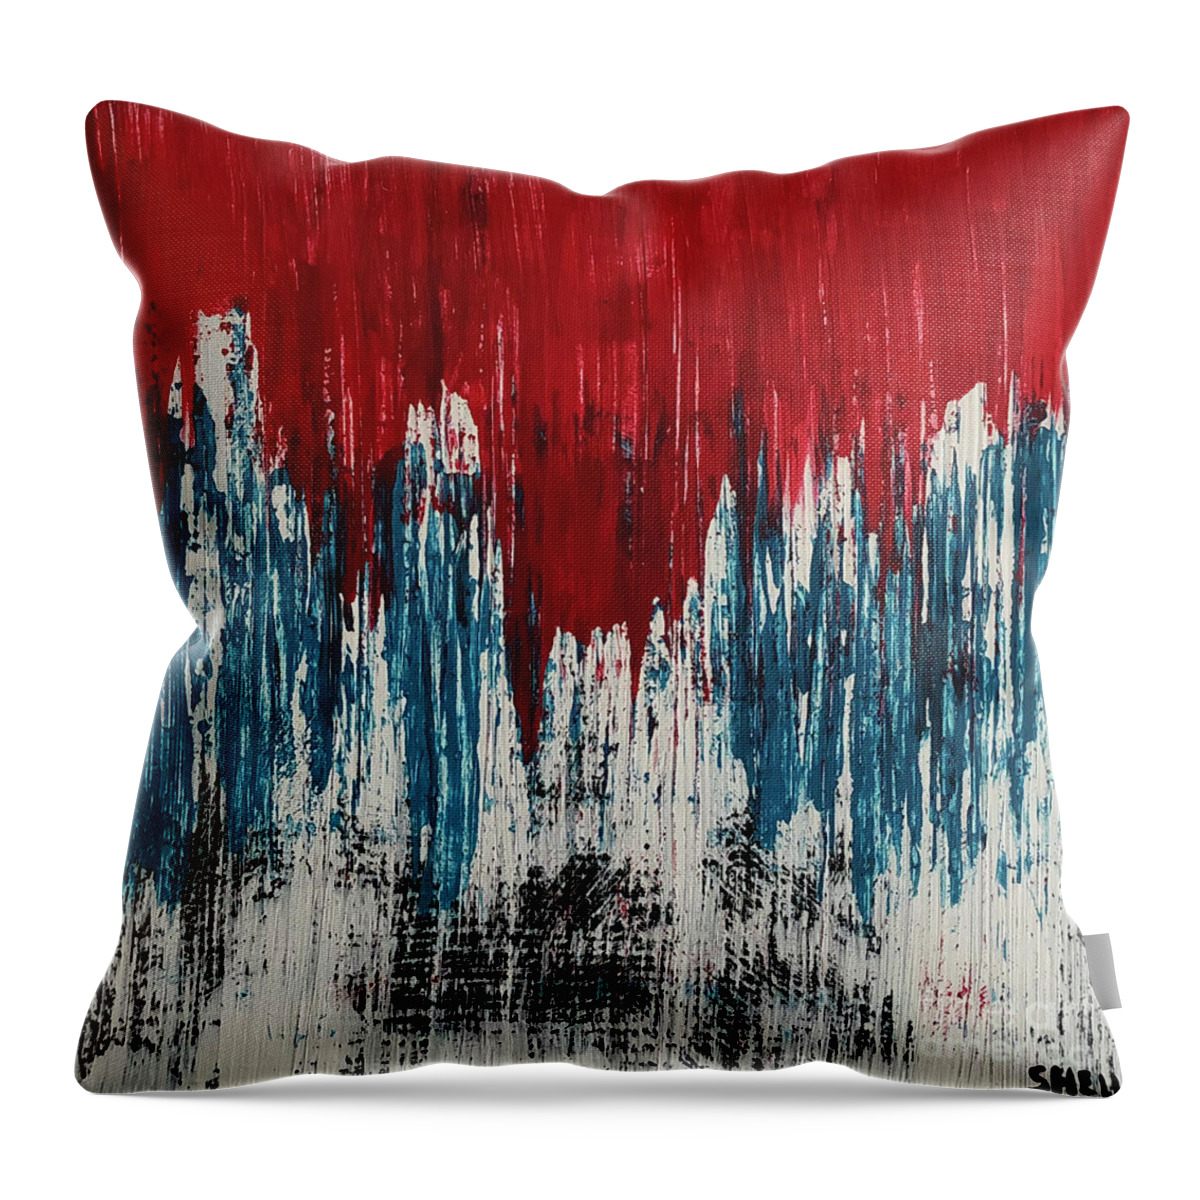 America Throw Pillow featuring the painting America by Amanda Sheil